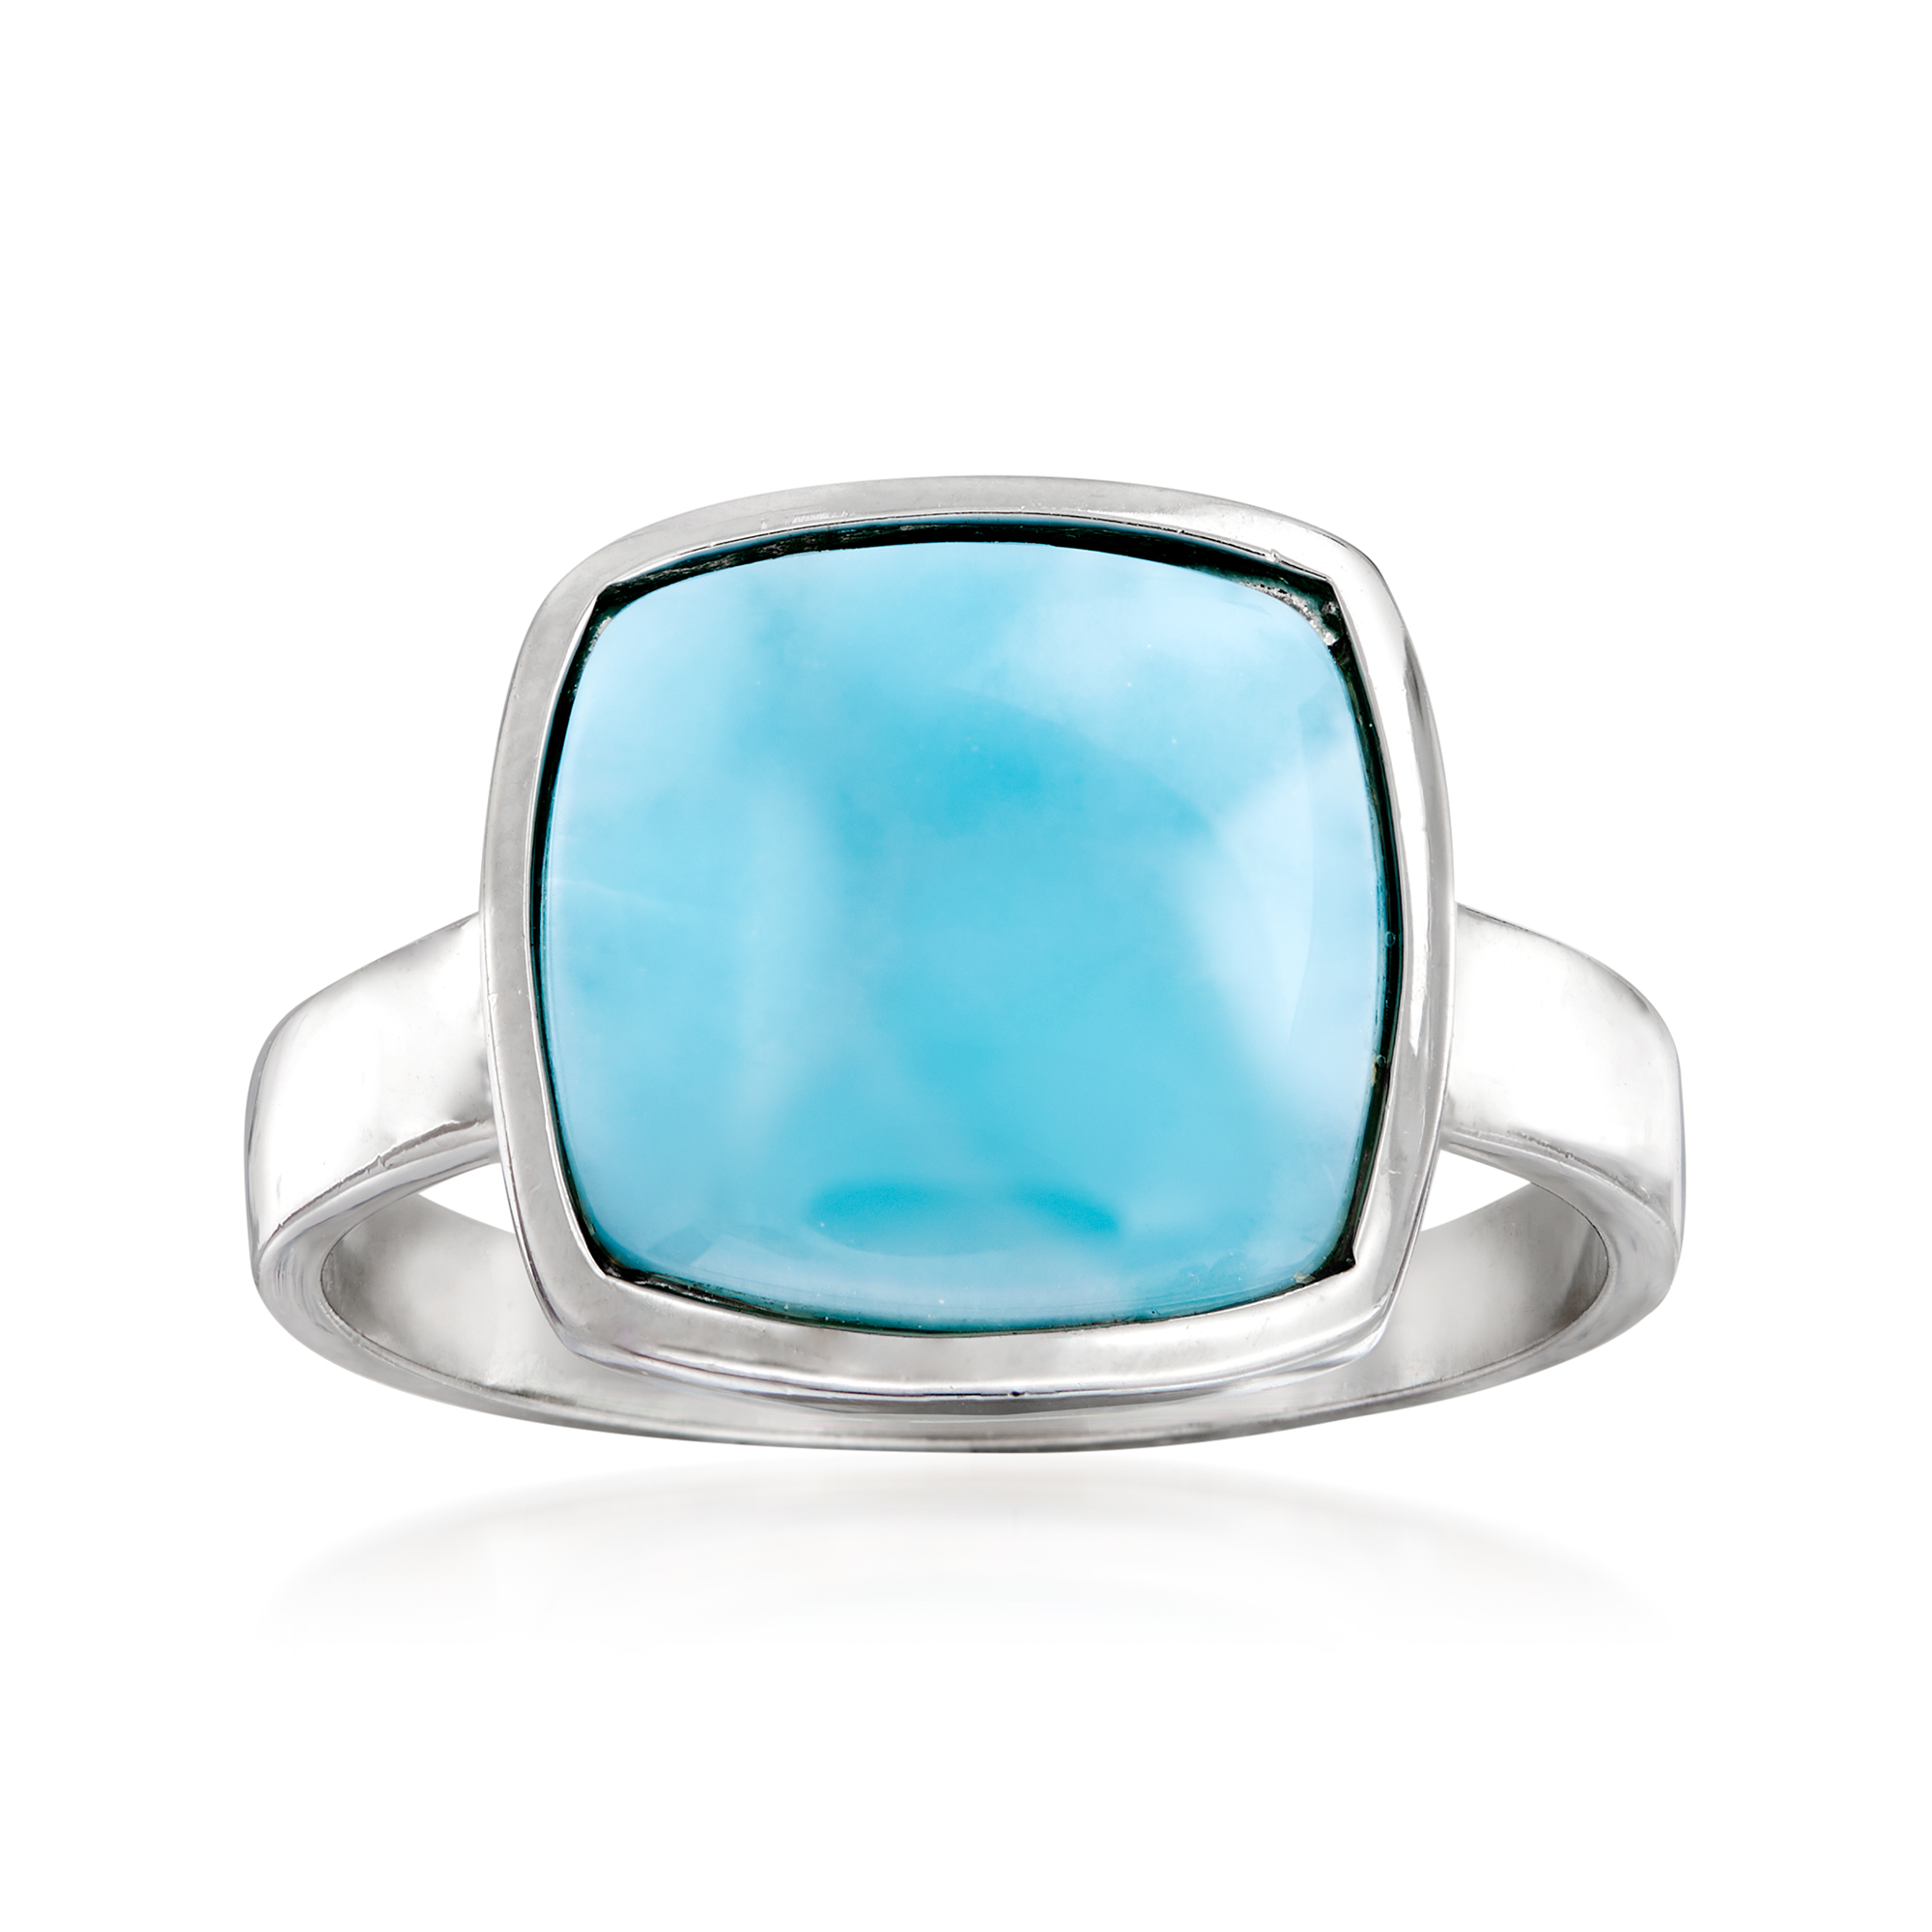 Dominican Republic Larimar Gemstone Solid 925 Sterling Silver Ring Size 8.25#KD-974